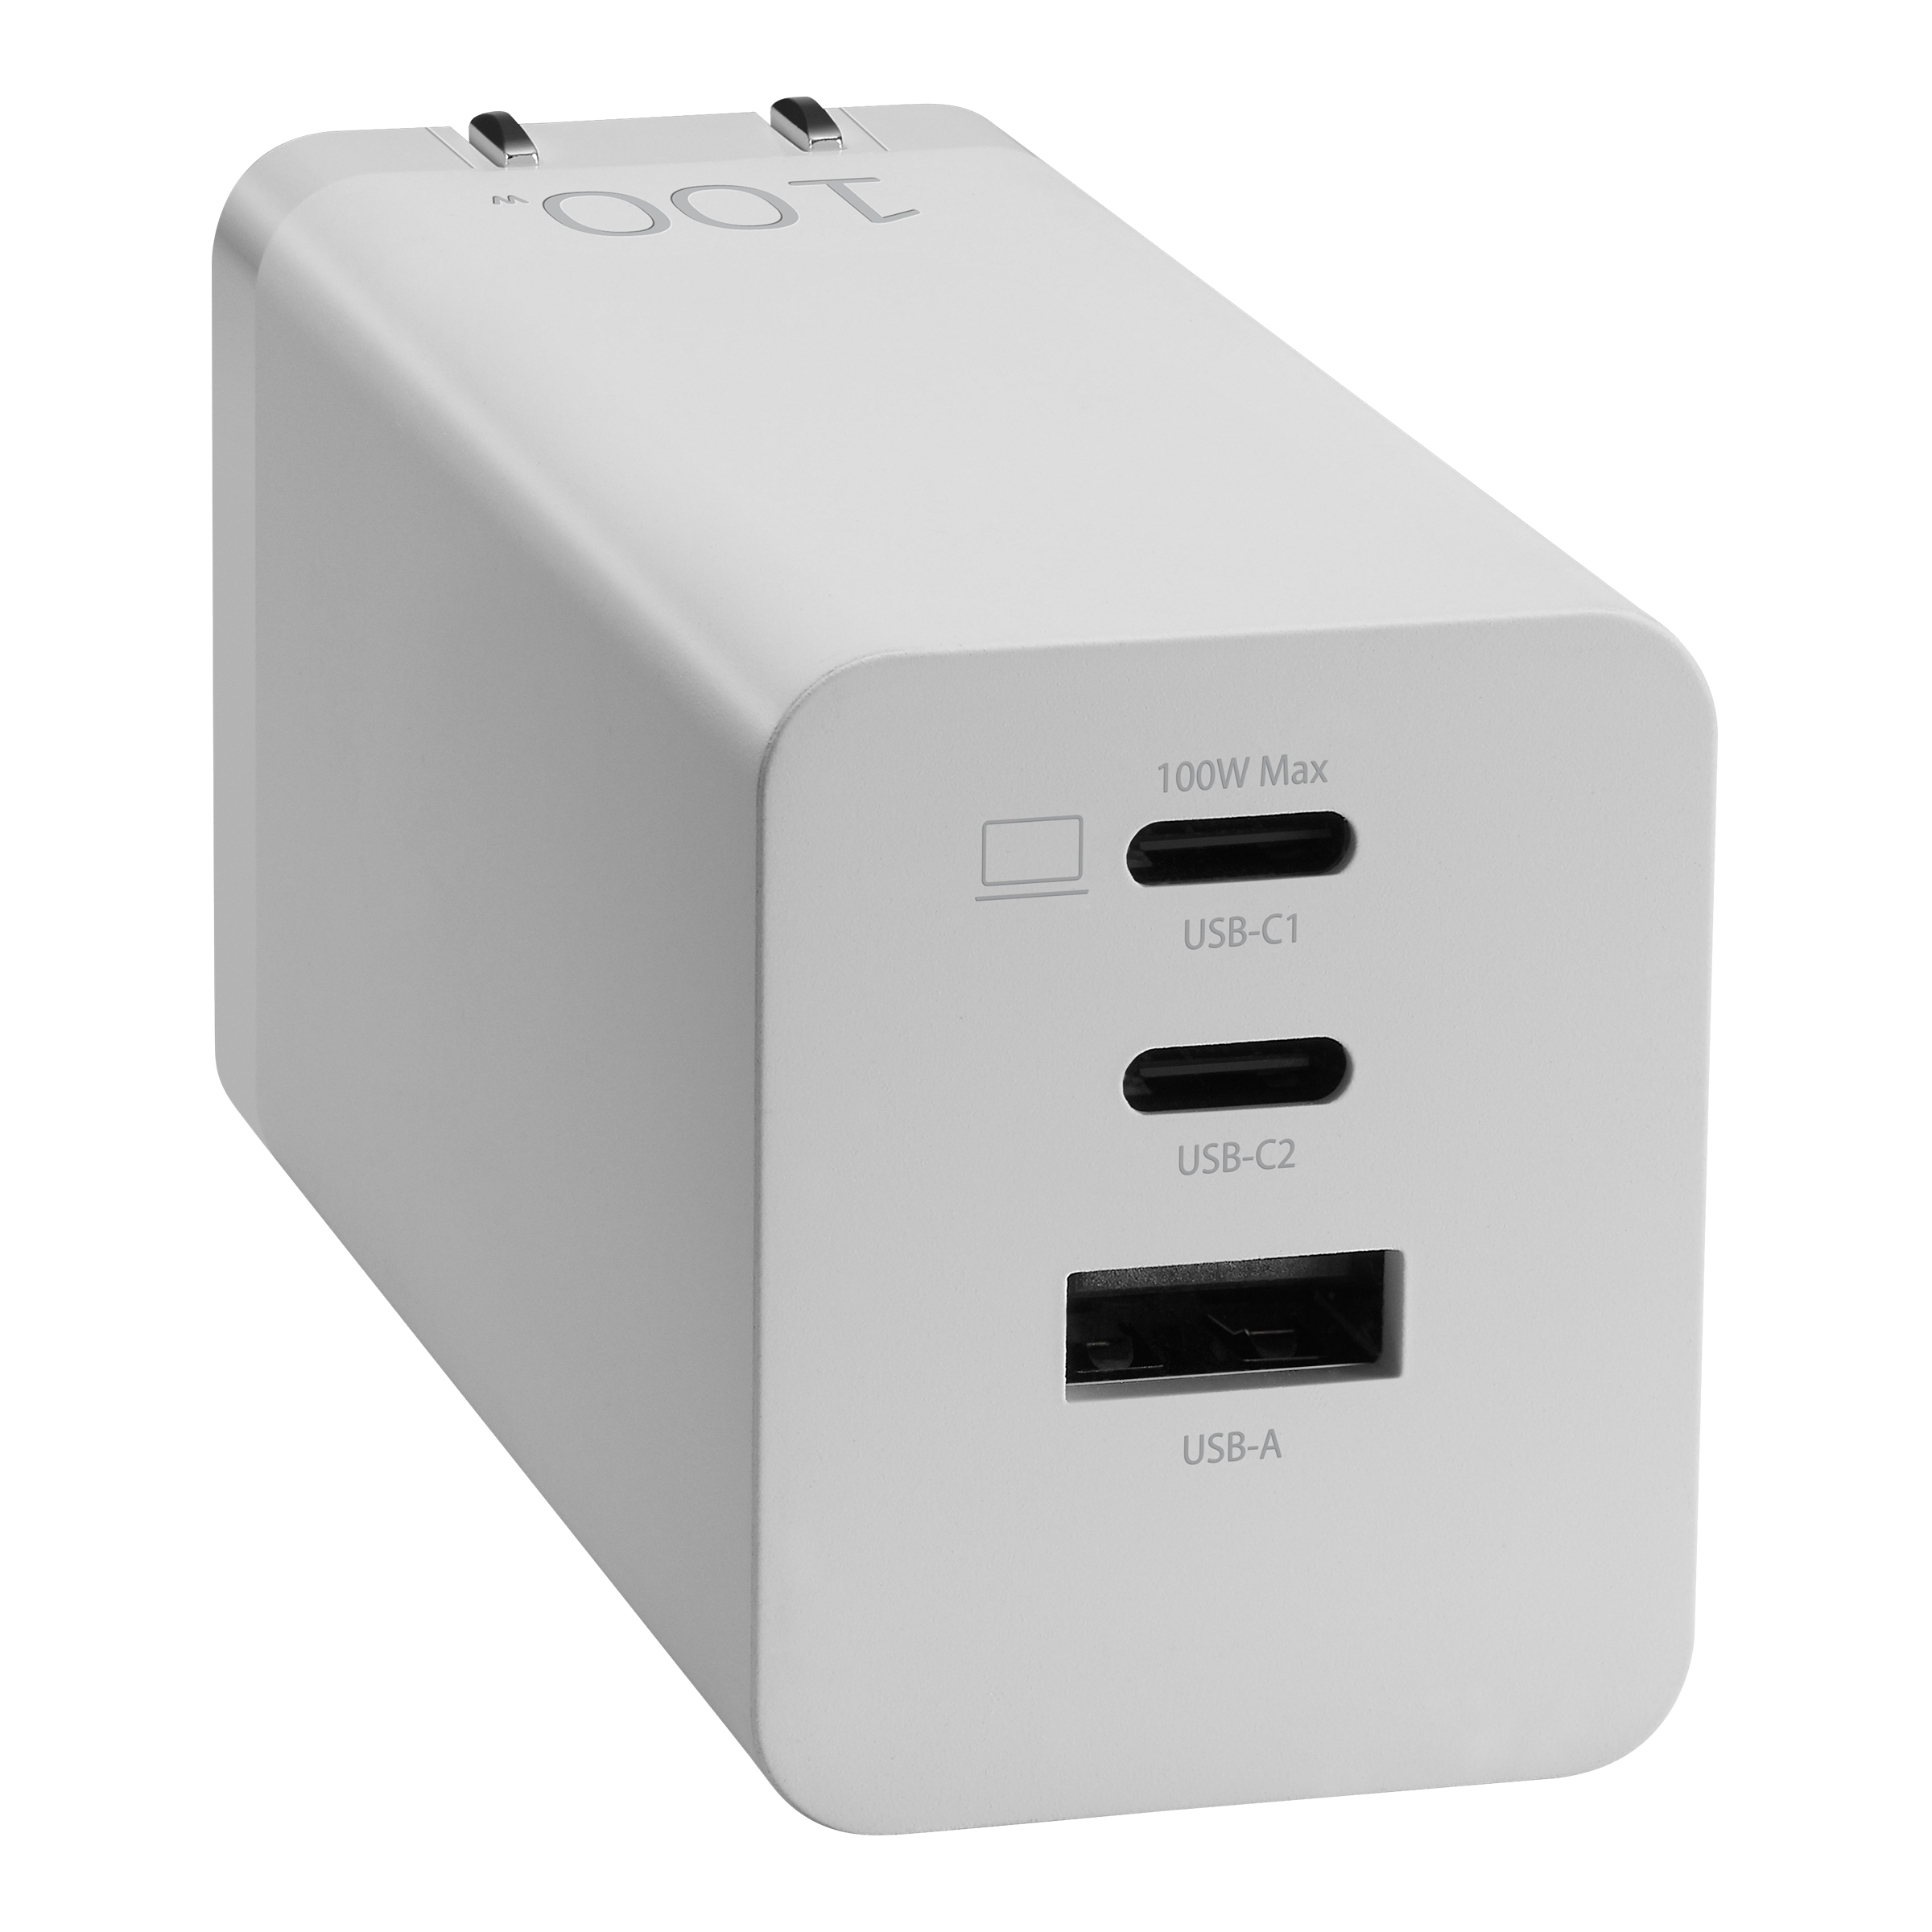 ASUS Adapters and Chargers - All Models｜Adapters and Chargers｜ASUS Global